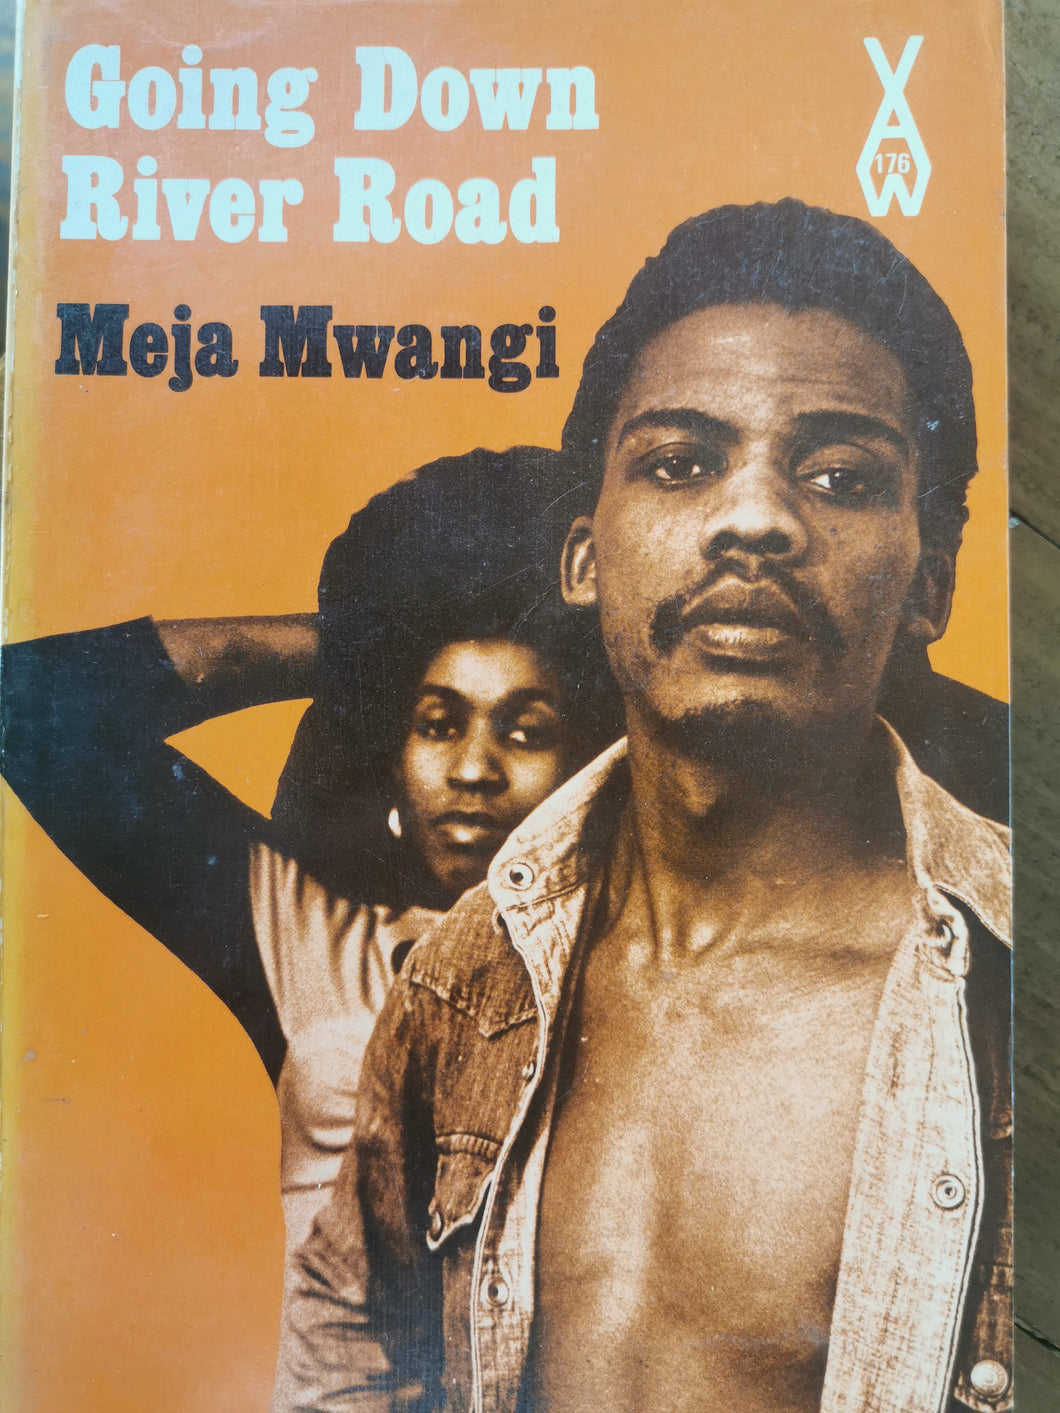 Meja Mangwi - Going Down River Road